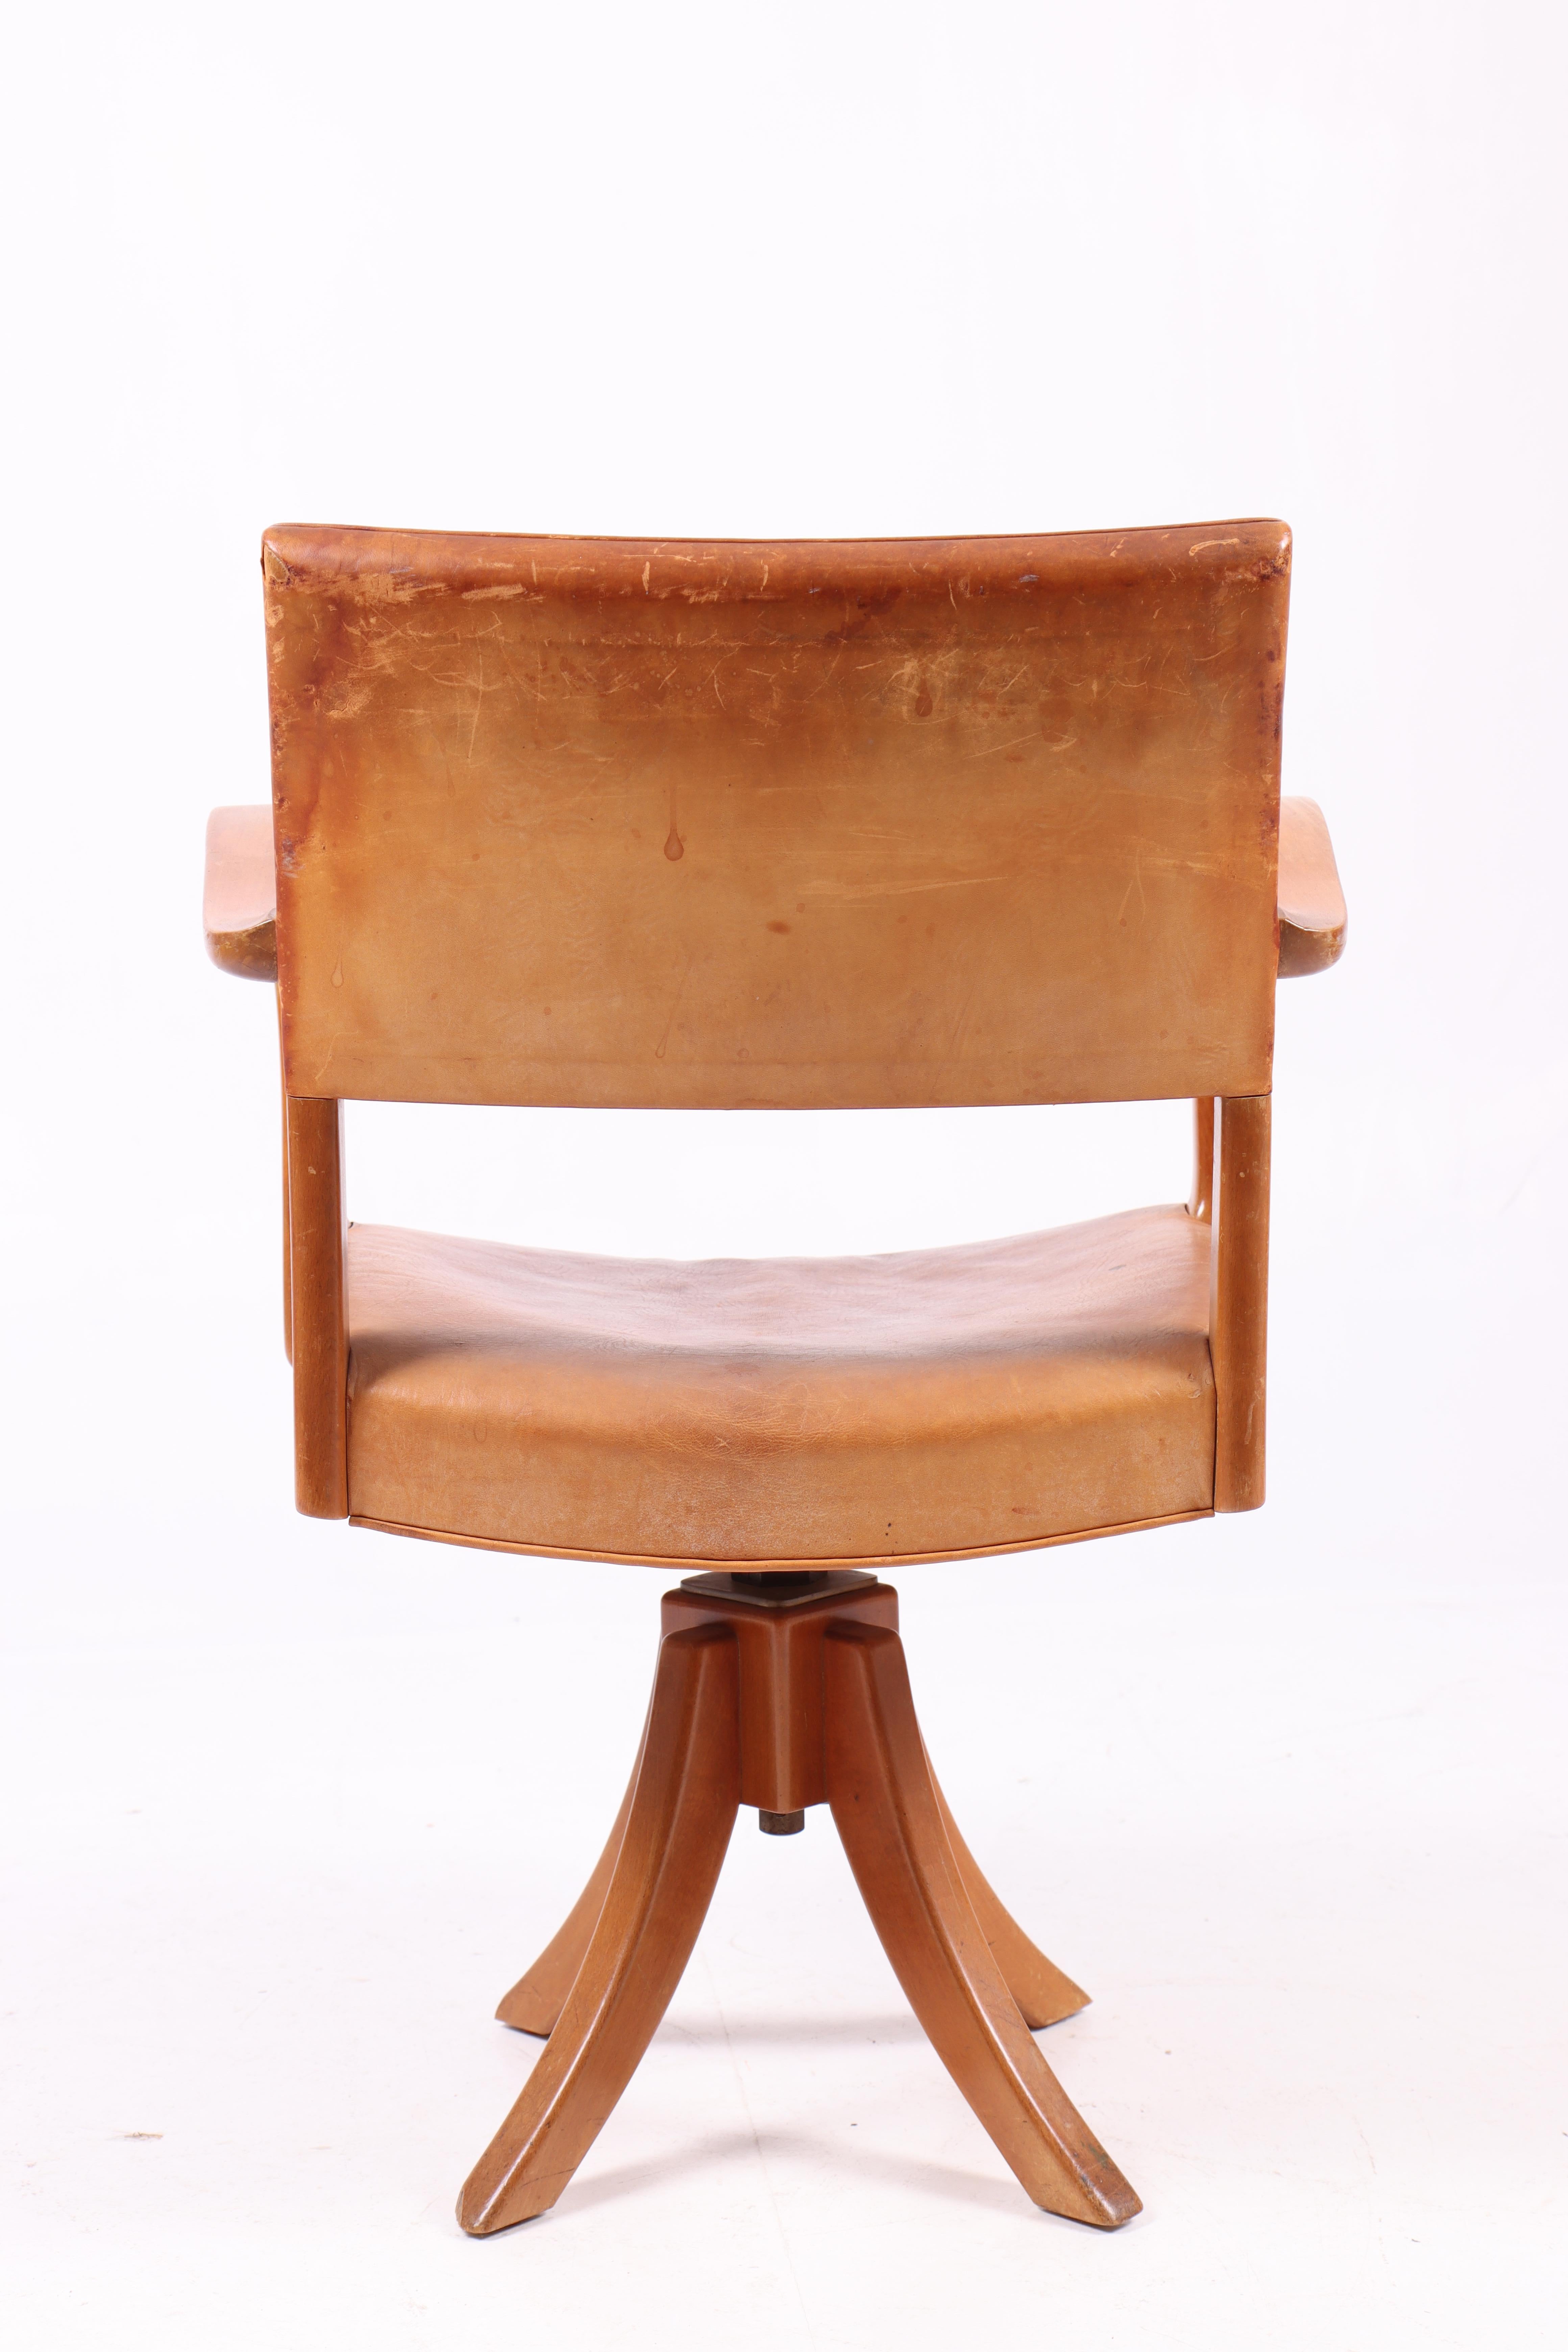 Mid-20th Century Desk Chair in Patinated Leather by Danish Cabinetmaker 1940s For Sale